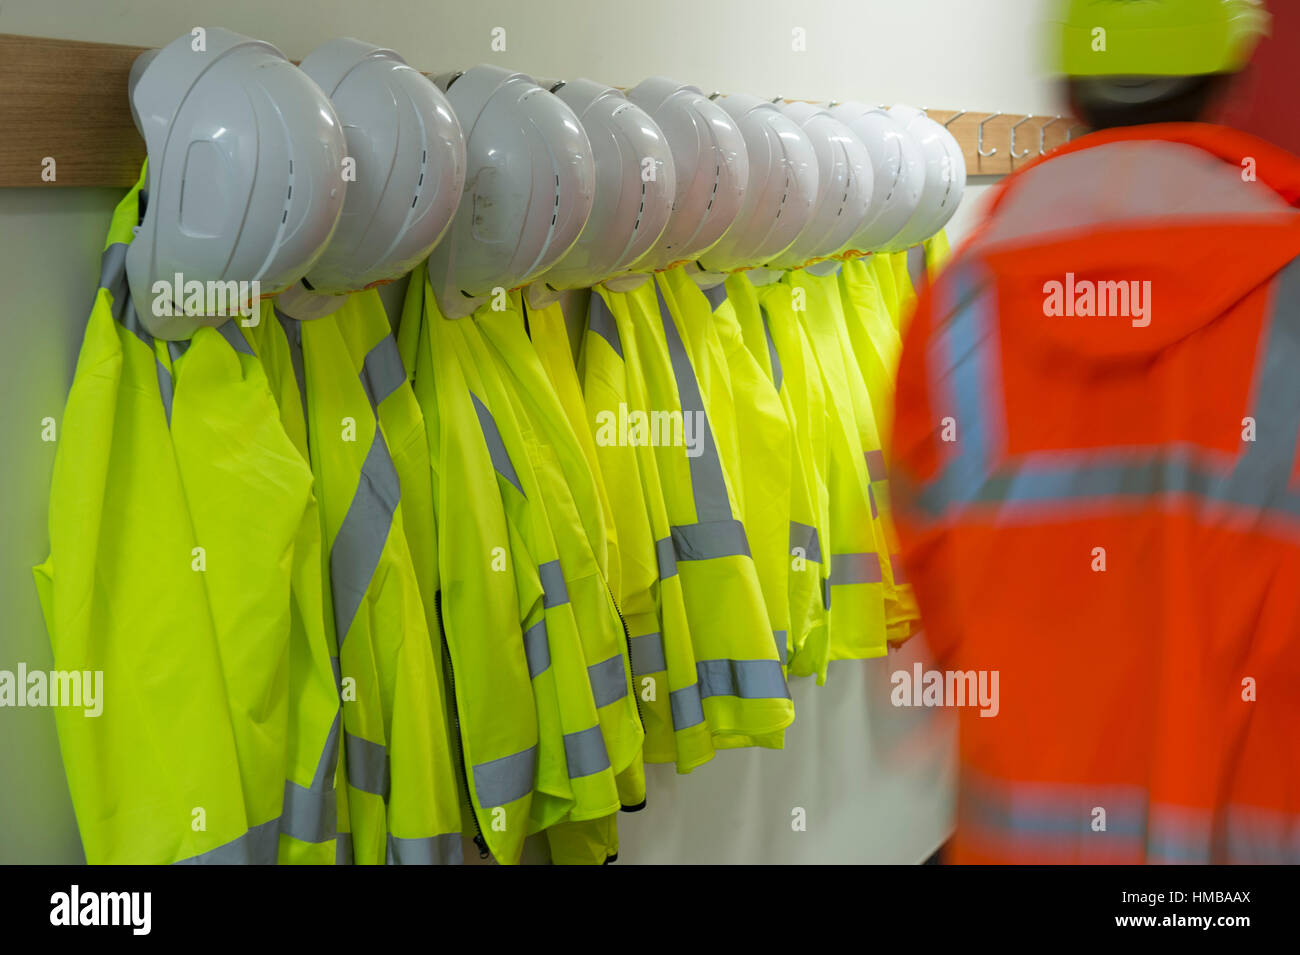 Man In safety coat walking past hangars of safety clothing Stock Photo